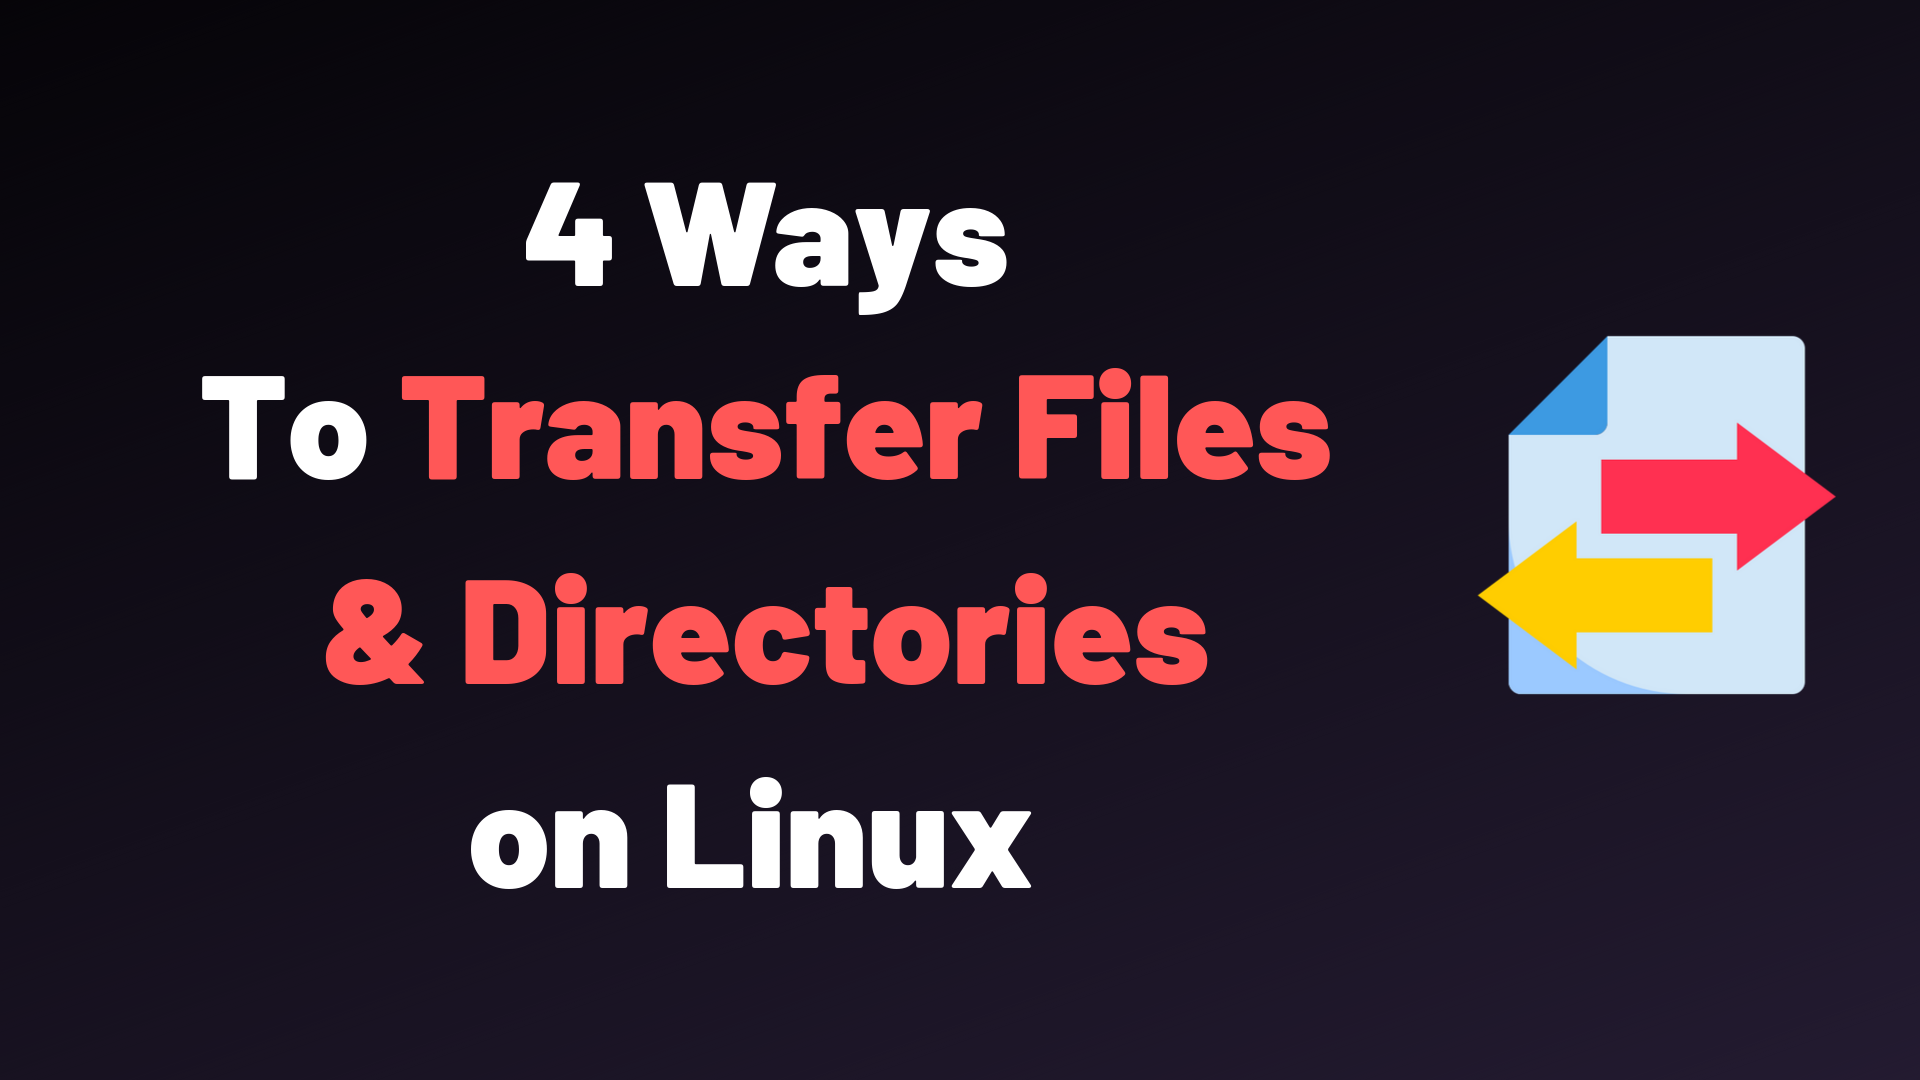 4 Ways to Transfer Files and Directories on Linux